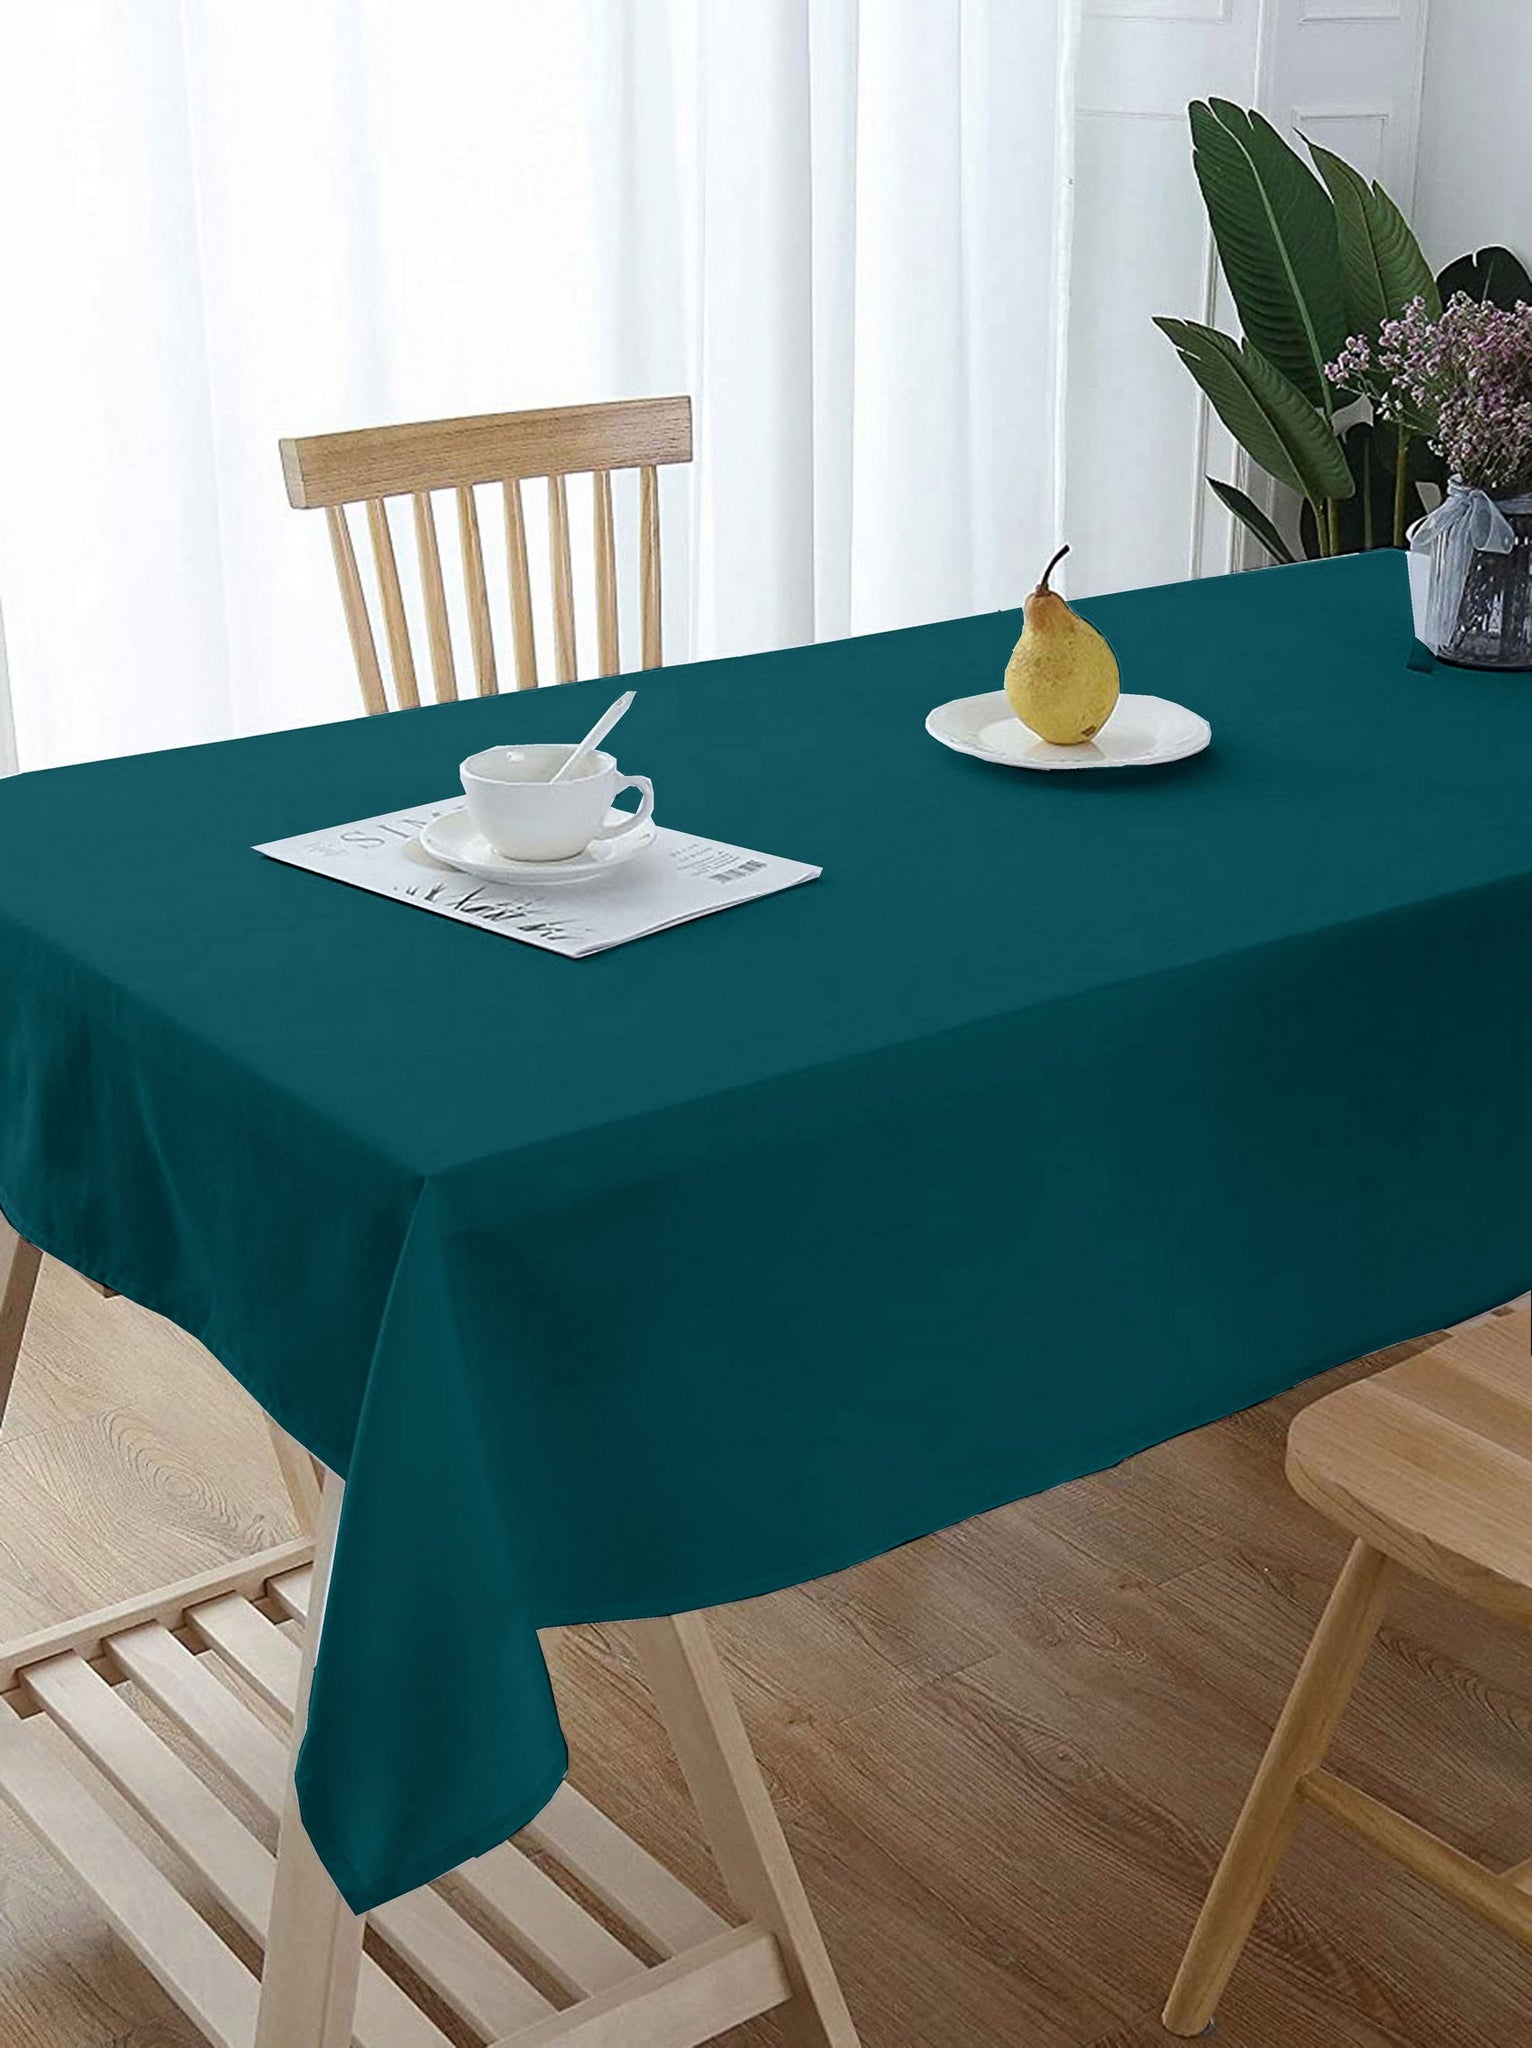 Lushomes center table cover, Royal Green, Classic Plain Dining Table Cover Cloth (Size 36 x 60”, Center Table Cloth)